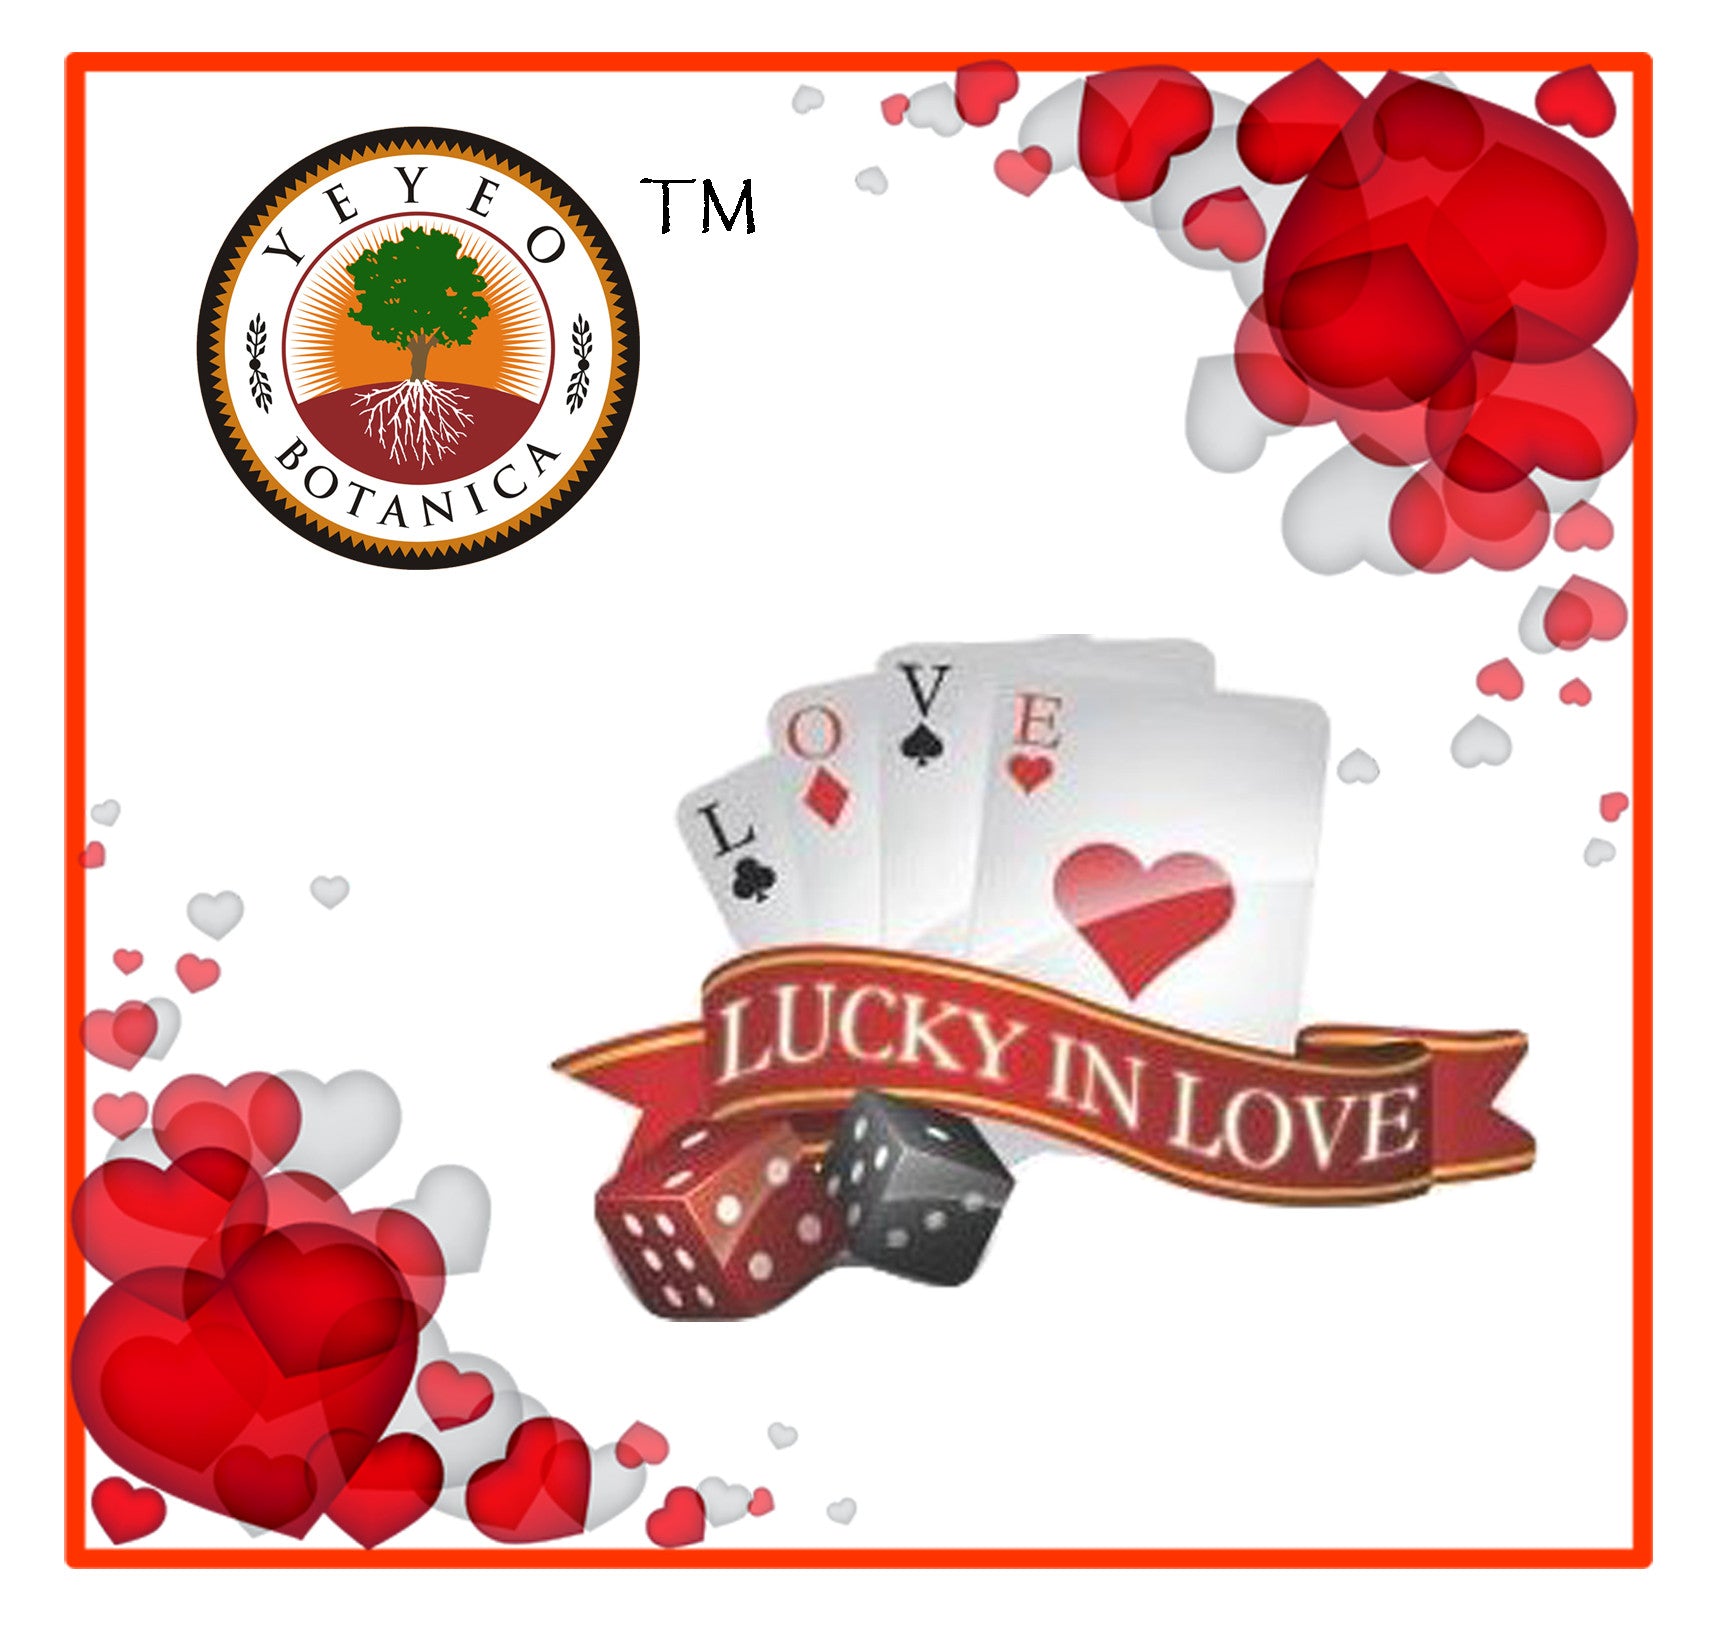 Be Lucky In Love all year round